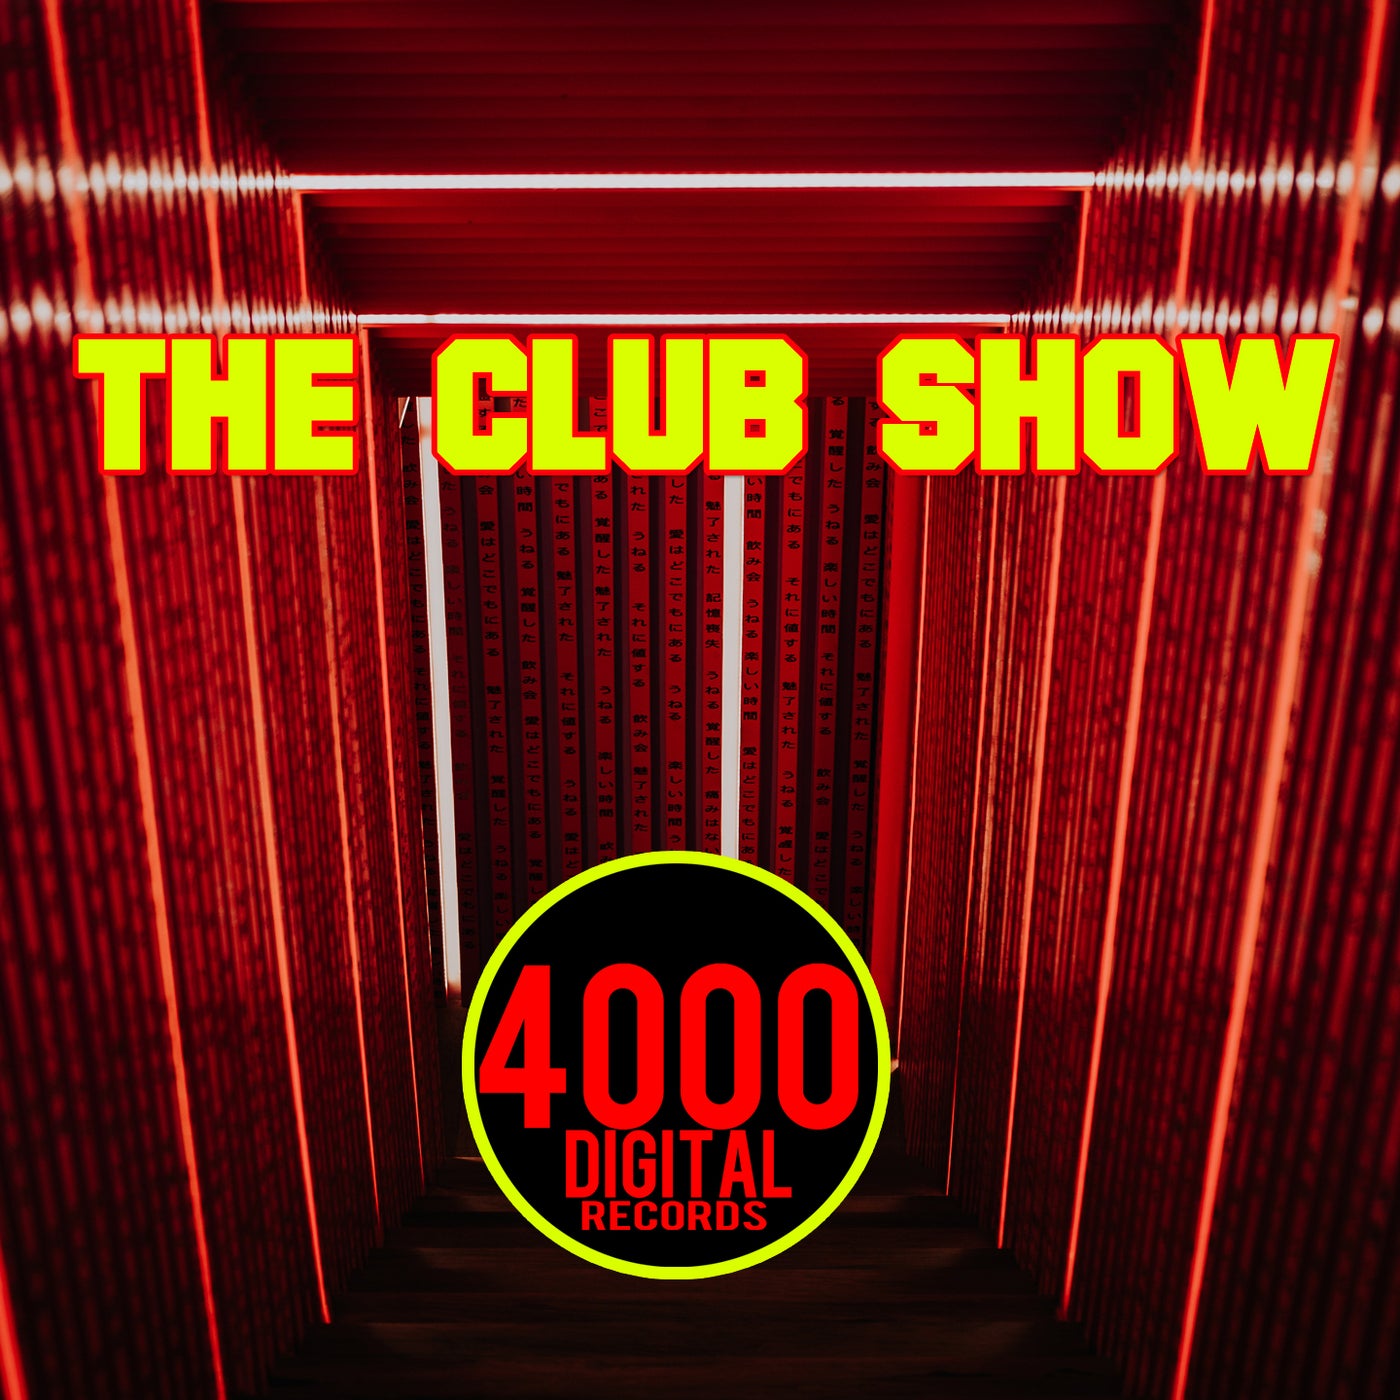 The Club Show